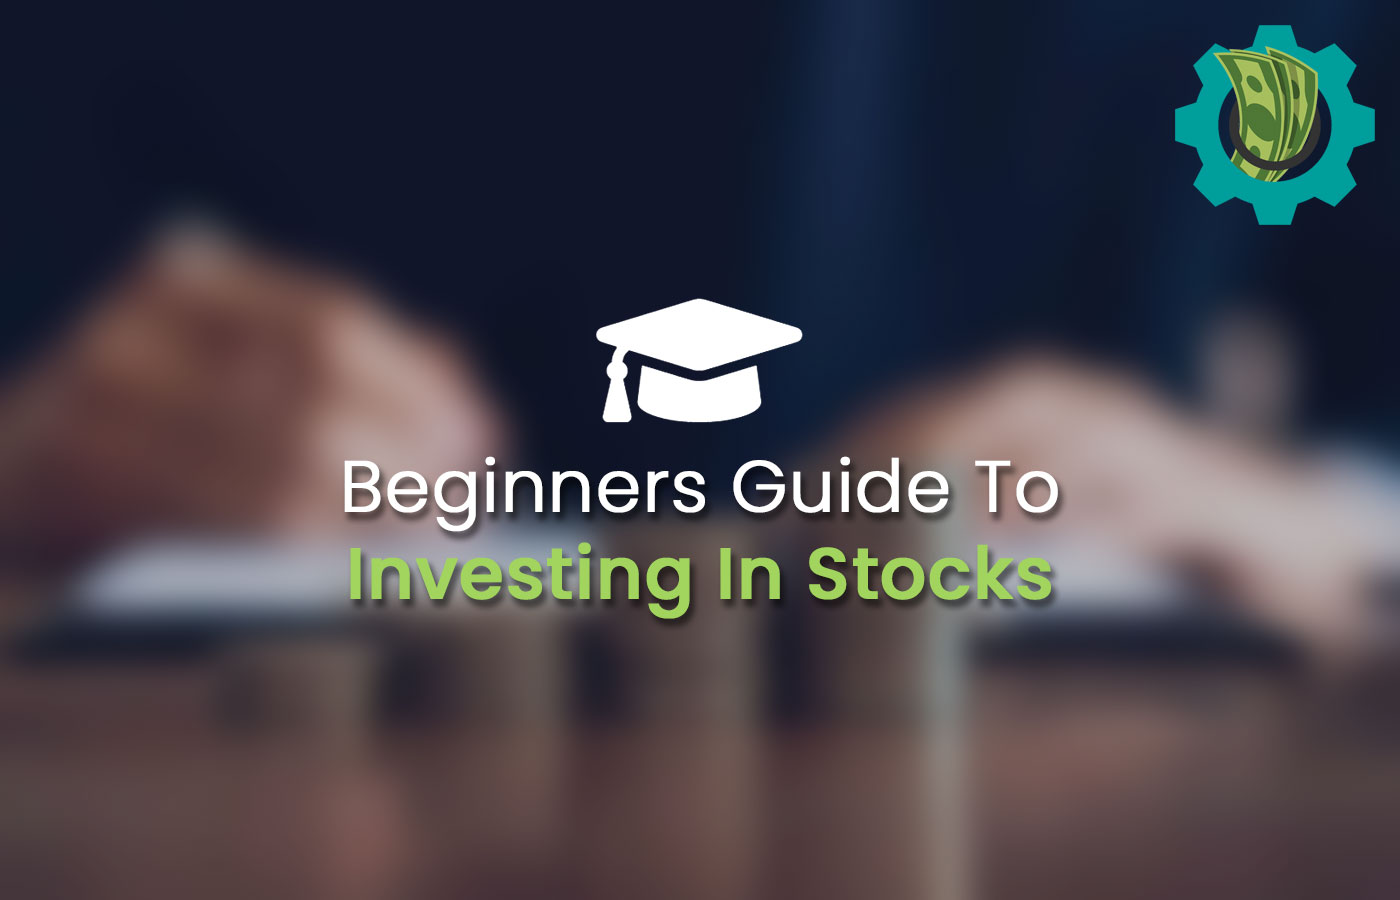 Beginner investor learning about investing in stocks